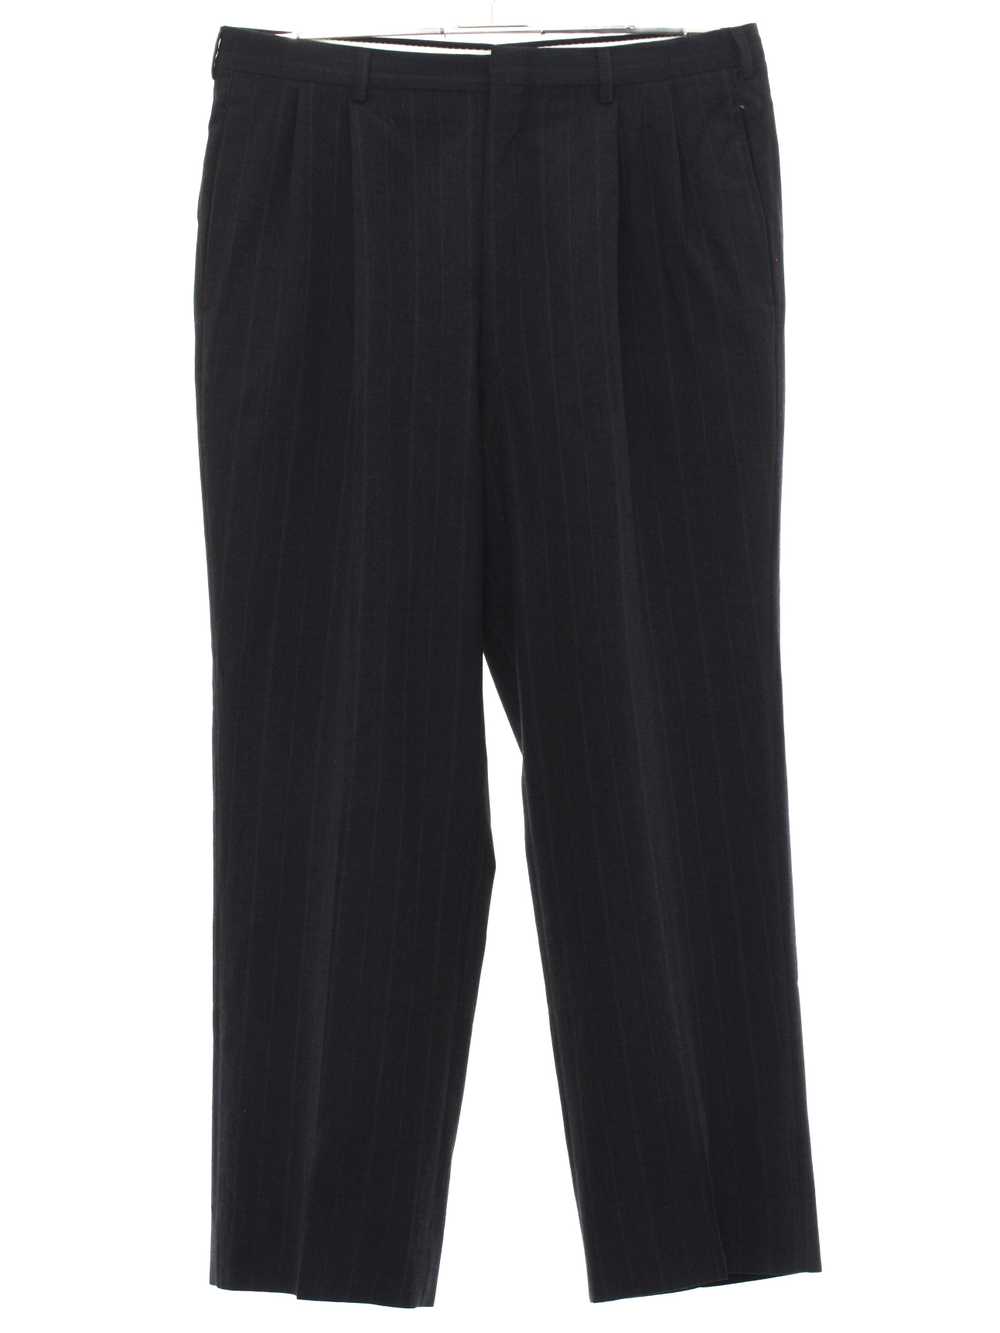 1980's Mens Totally 80s Pleated Pants - image 1